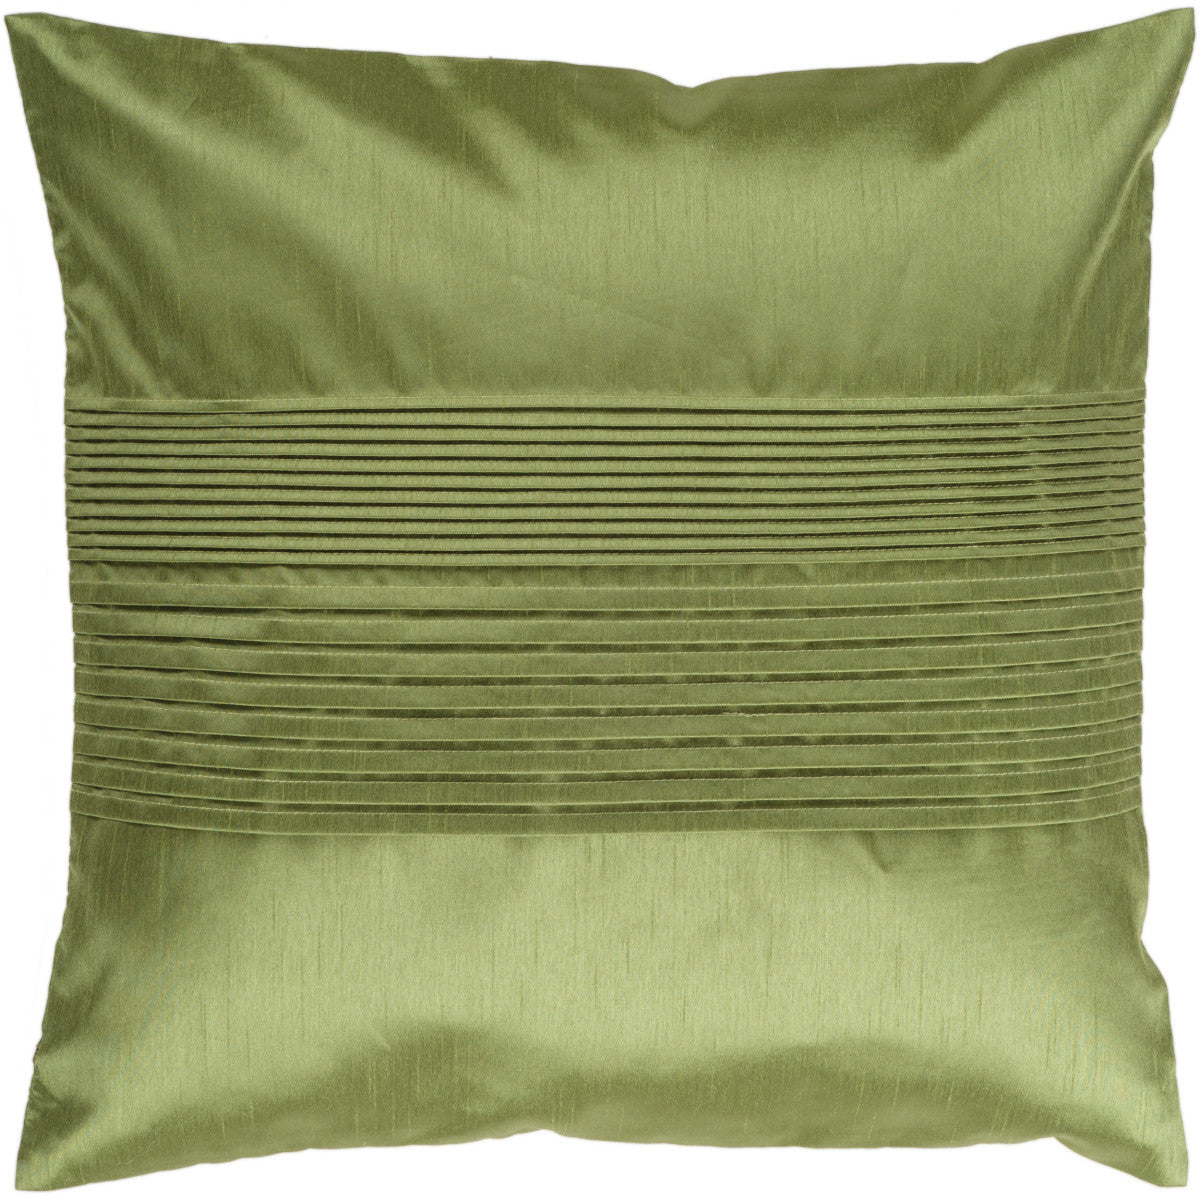 Surya Solid Pleated Lori Lee HH-013 Pillow